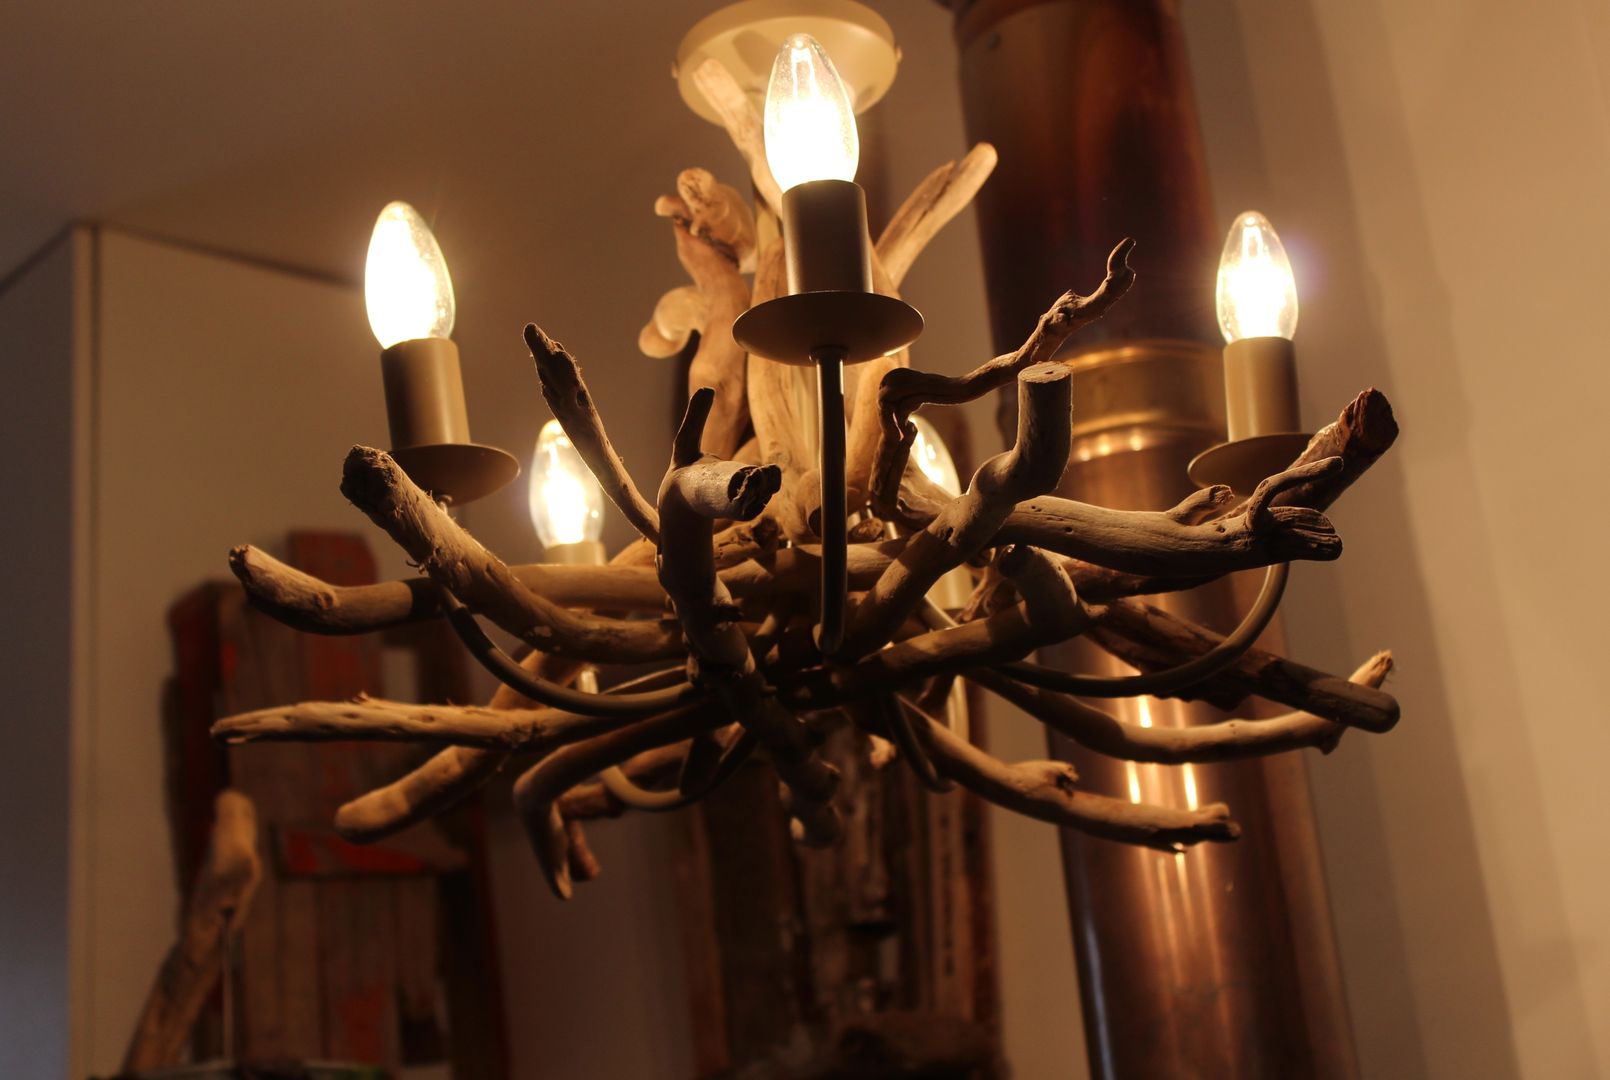 Driftwood chandeliers homify منازل Accessories & decoration